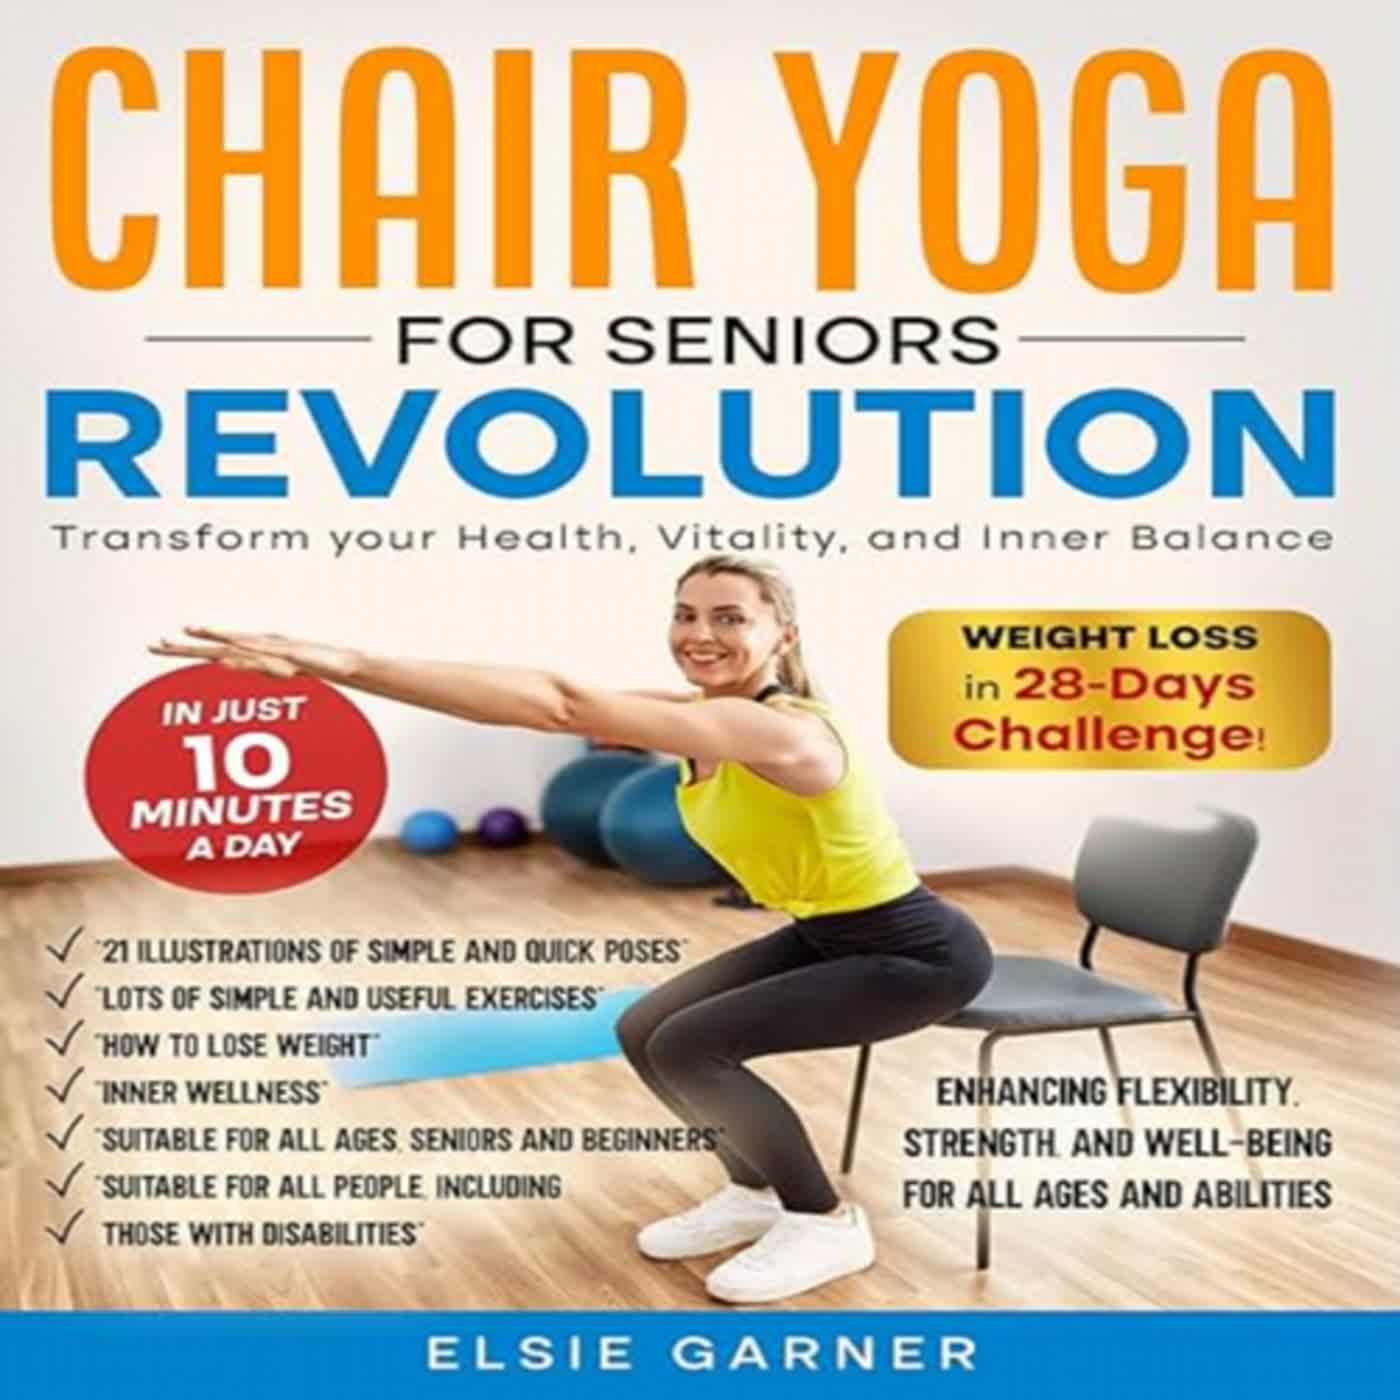 Chair Yoga for Seniors: 28-Day Challenge for Weight Loss with